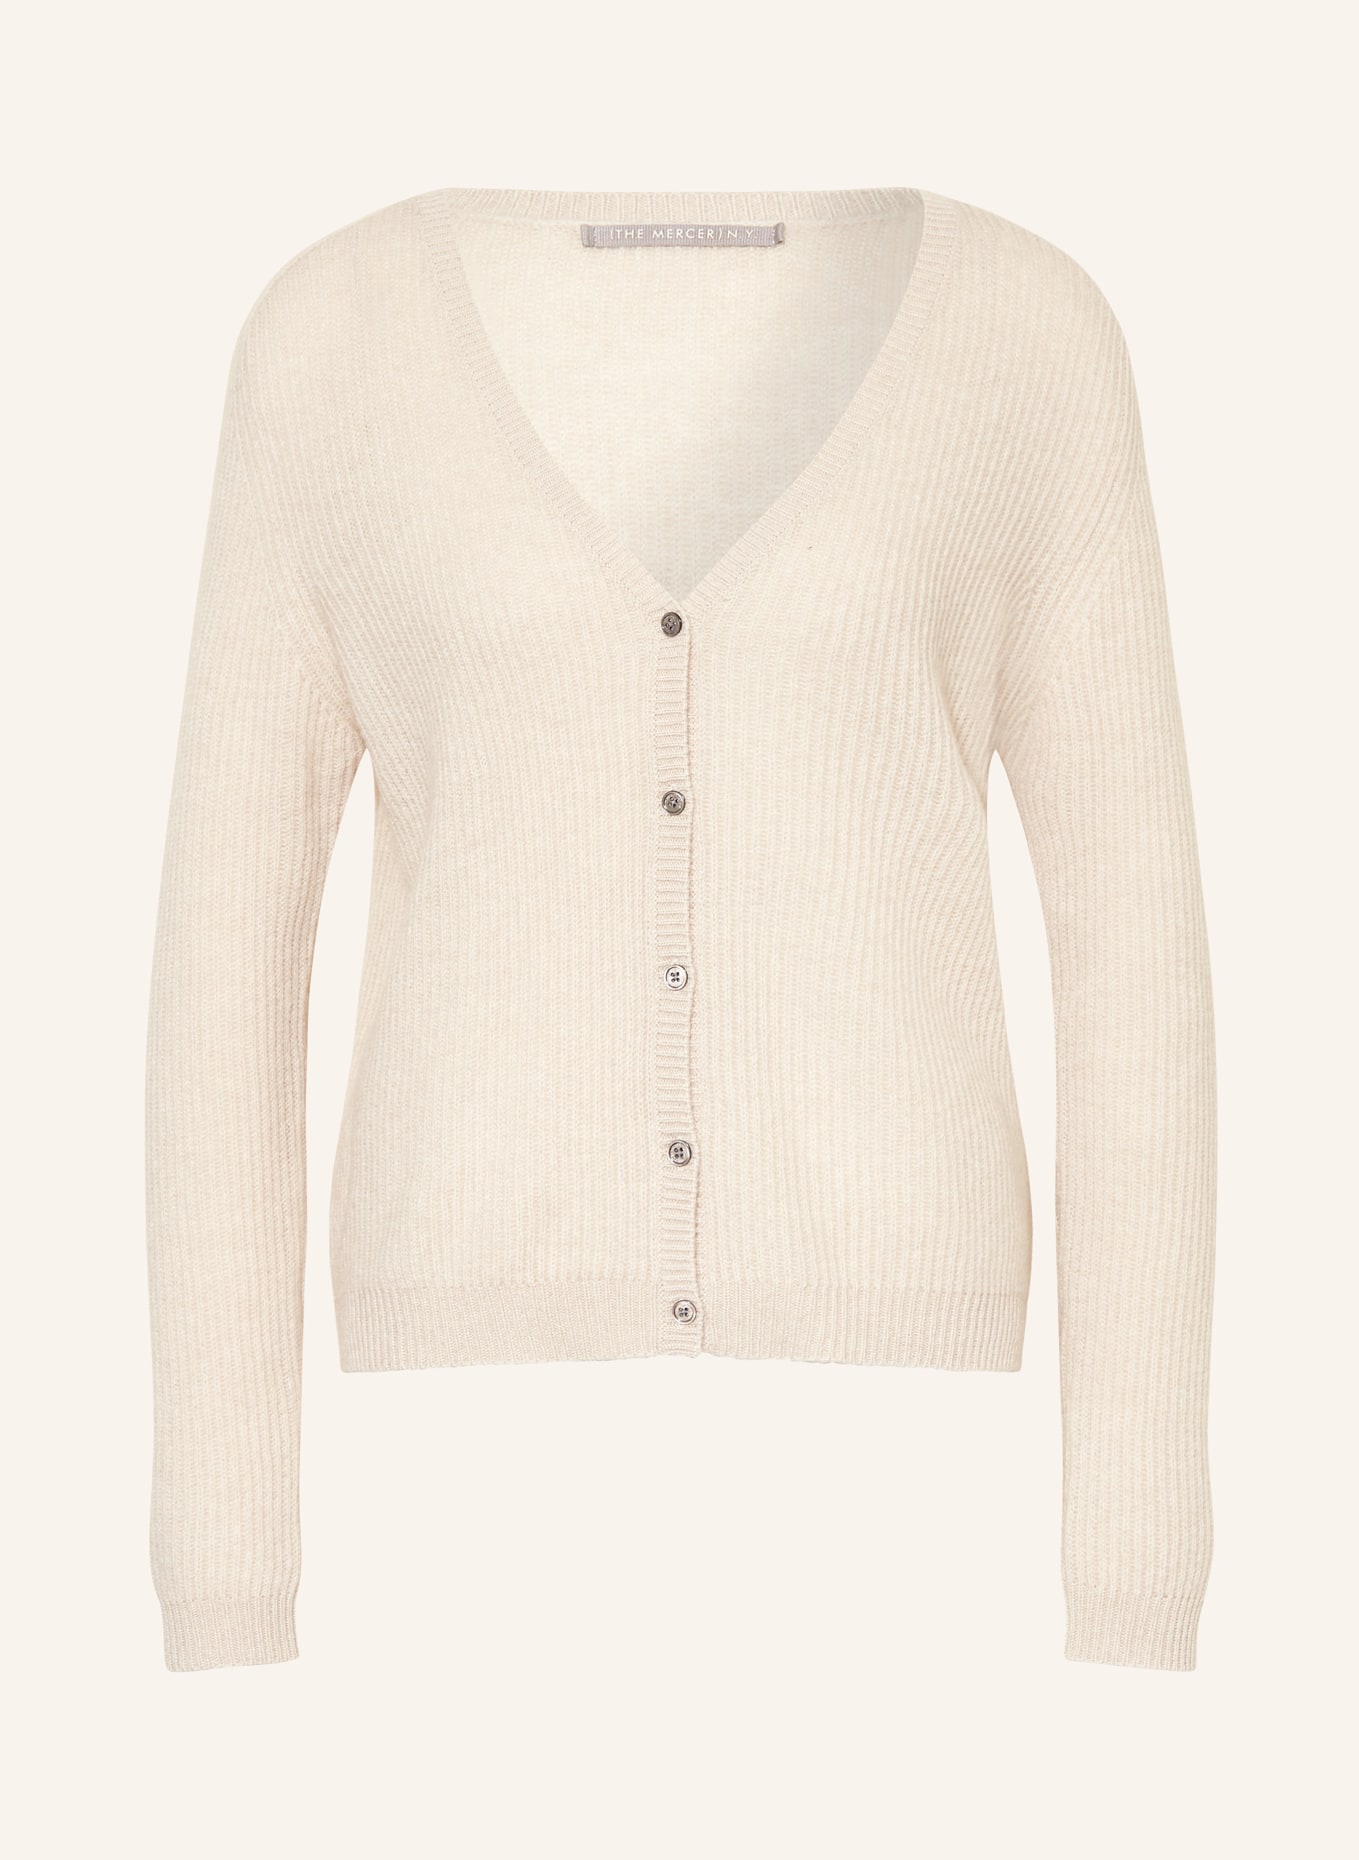 (THE MERCER) N.Y. Cashmere cardigan, Color: CREAM (Image 1)